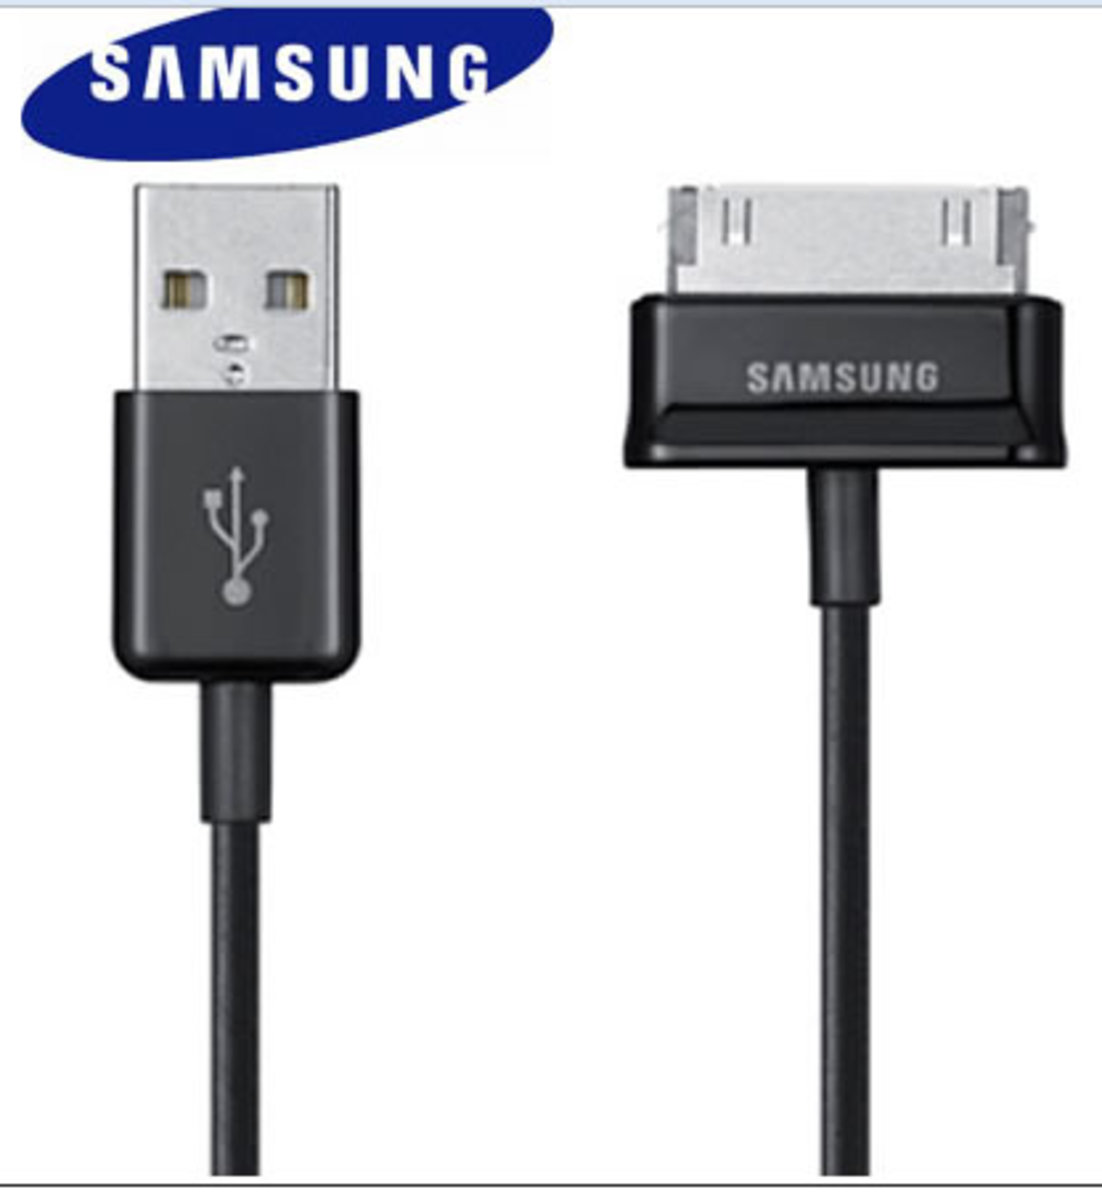 Samsung GALAXY USB Cable for Tablet